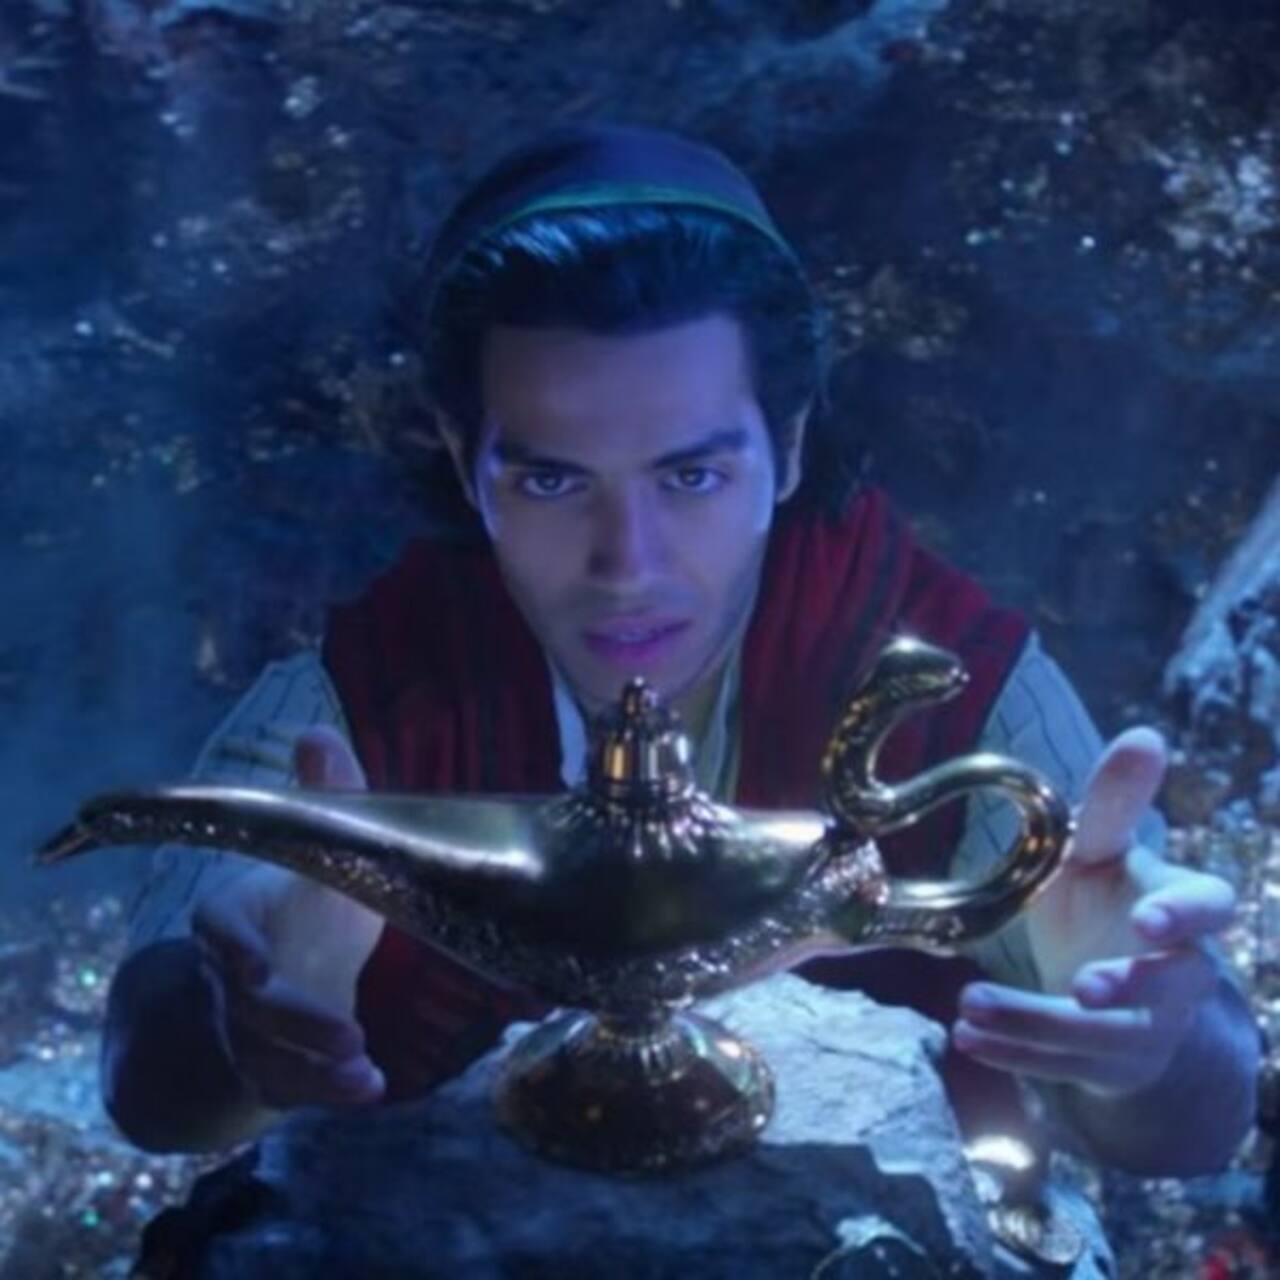 Aladdin box office collection day 3: The Mena Massoud-starrer rules the ticket windows with gross earnings of Rs 22.03 cr